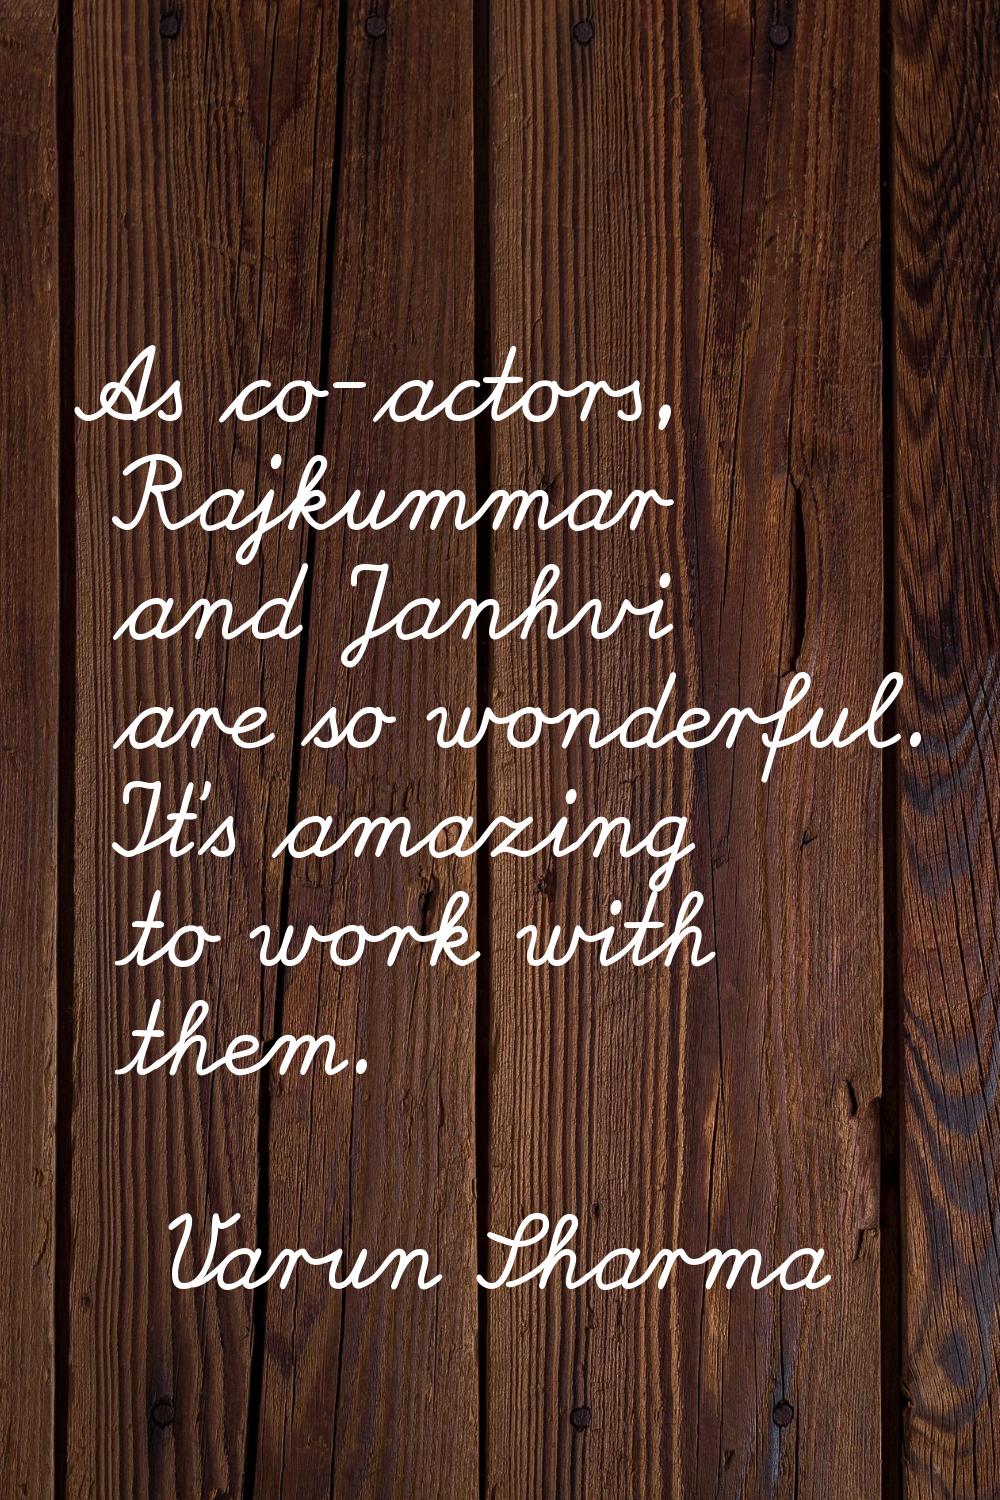 As co-actors, Rajkummar and Janhvi are so wonderful. It's amazing to work with them.